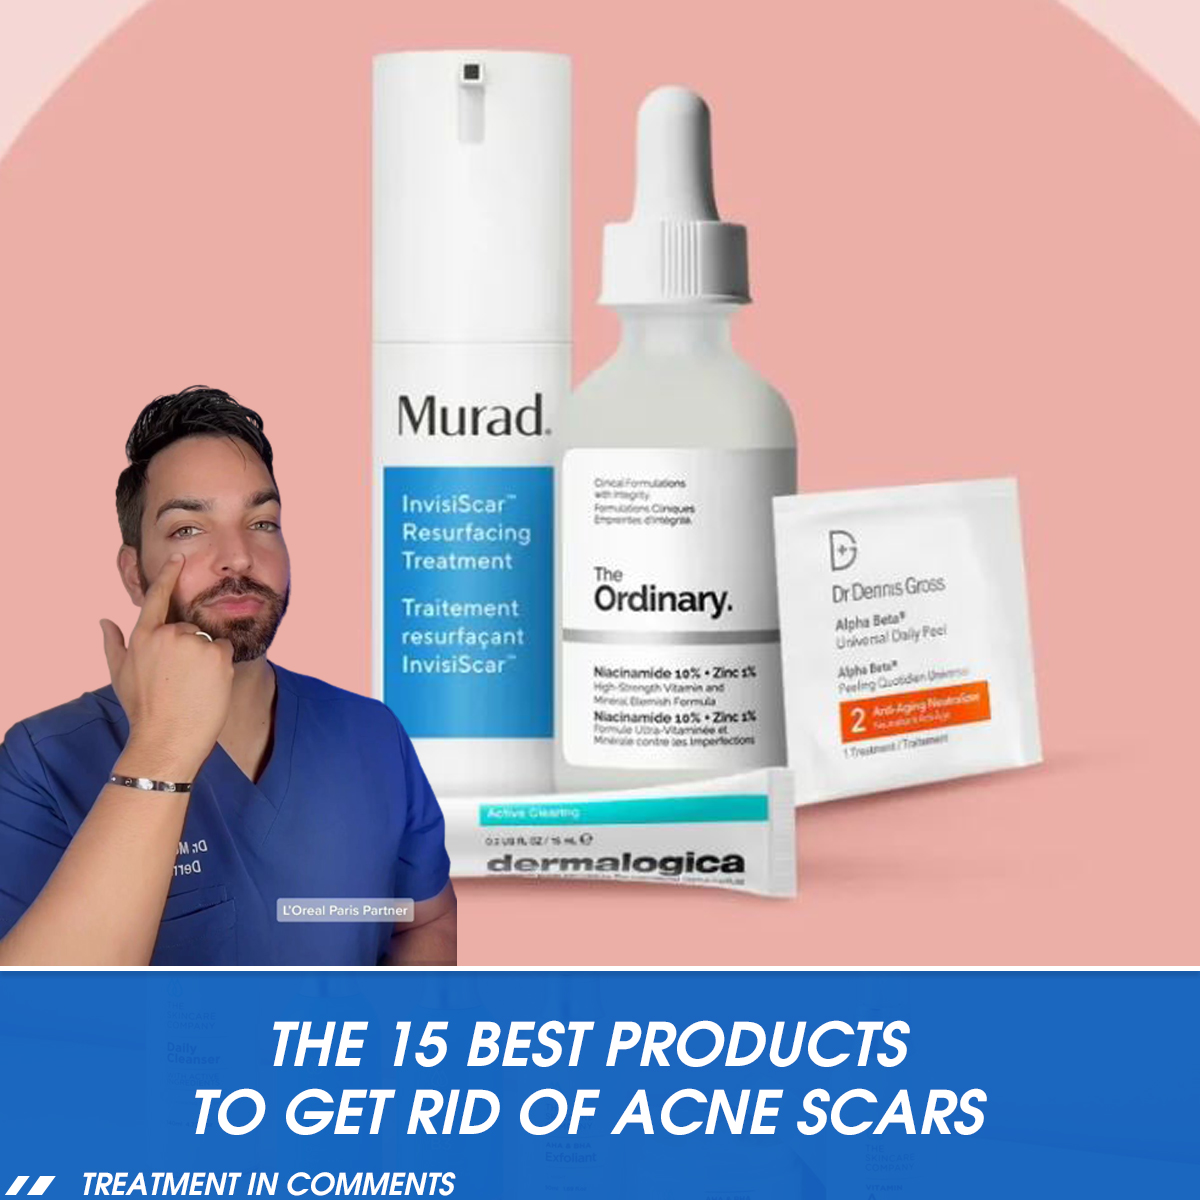 The 15 Best Products to Get Rid of Acne Scars, According to Dermatologists